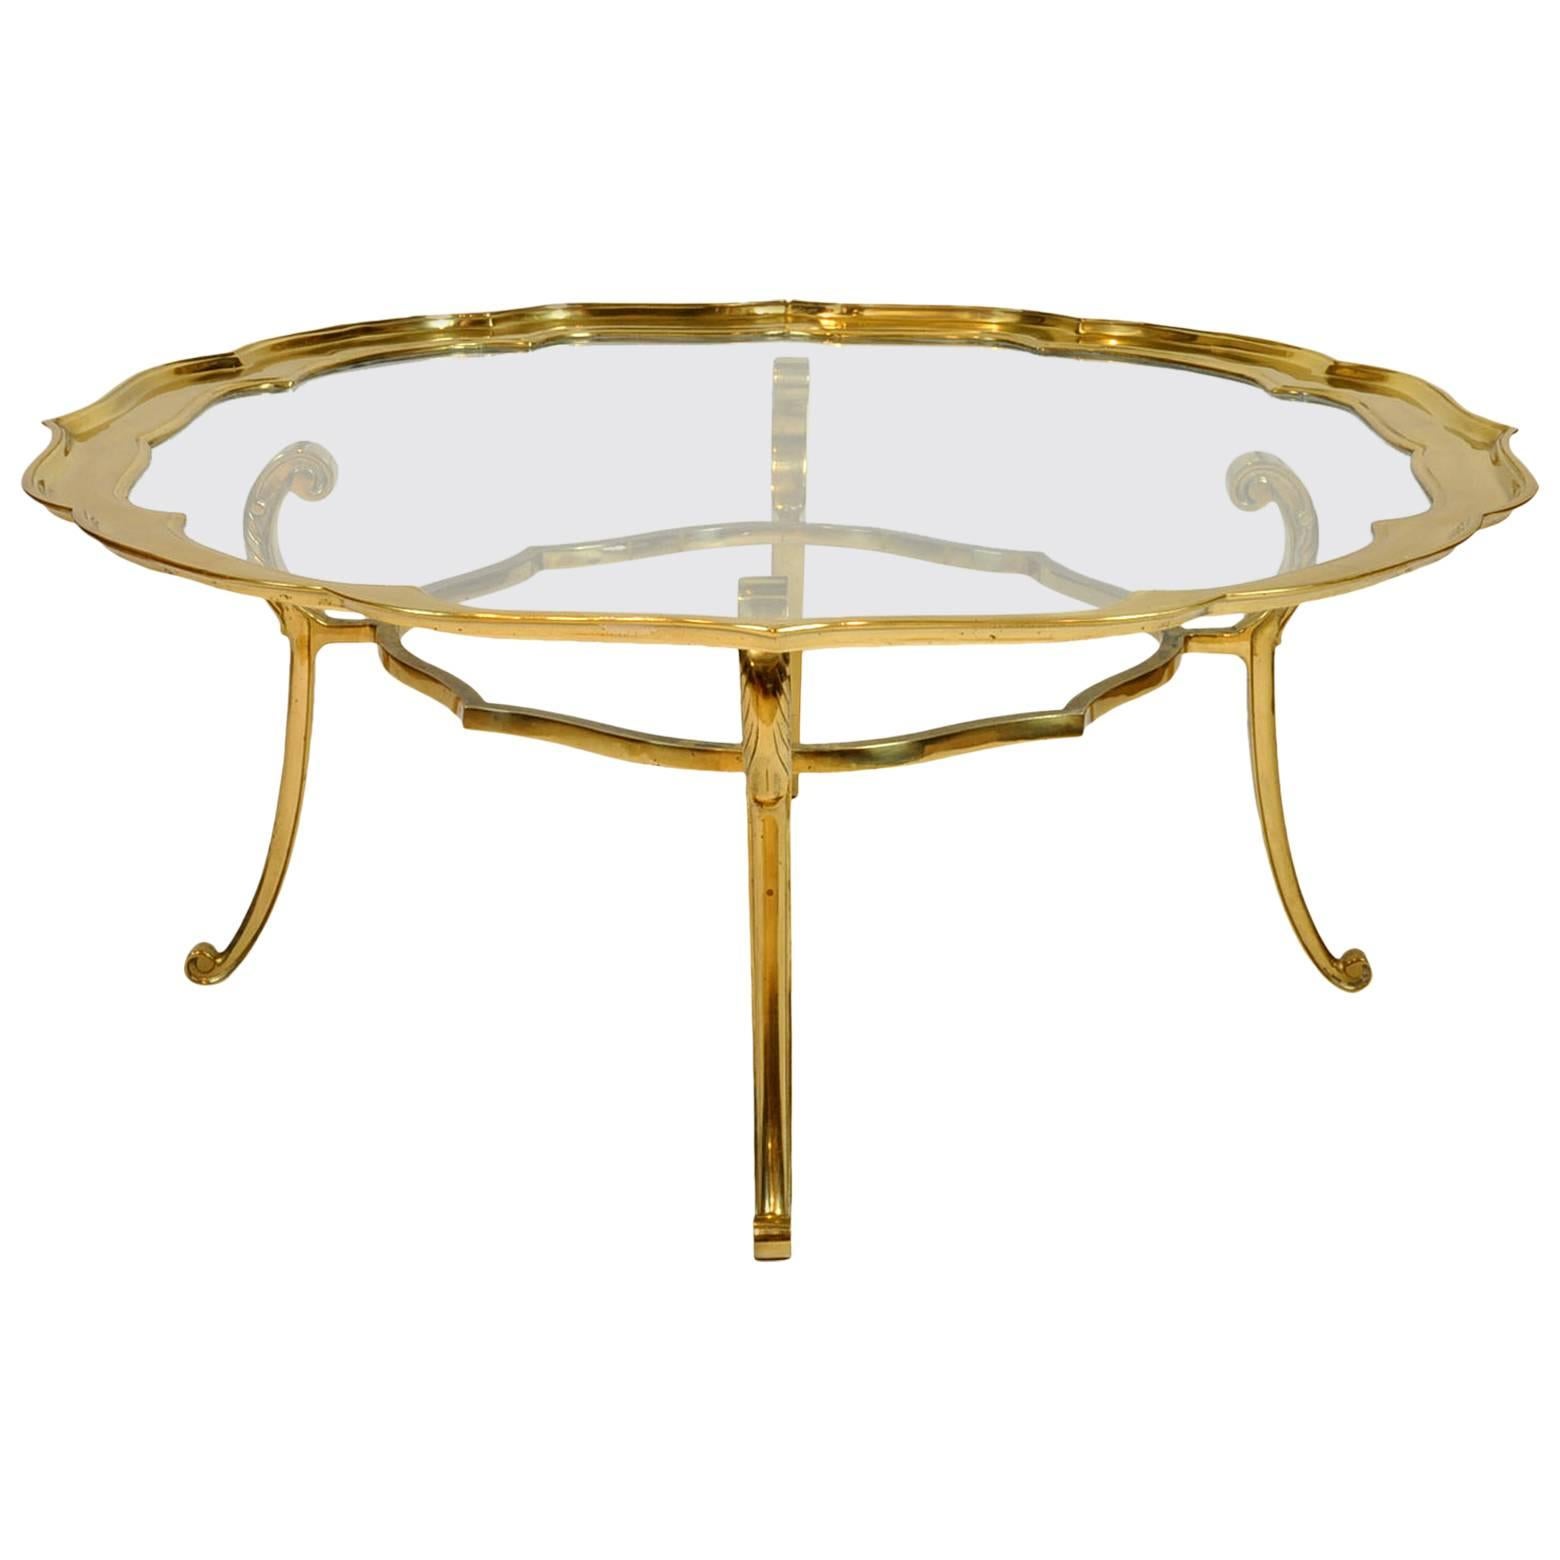 Vintage Mid-Century Scalloped Glass Top Brass Coffee Table with Scrolled Legs